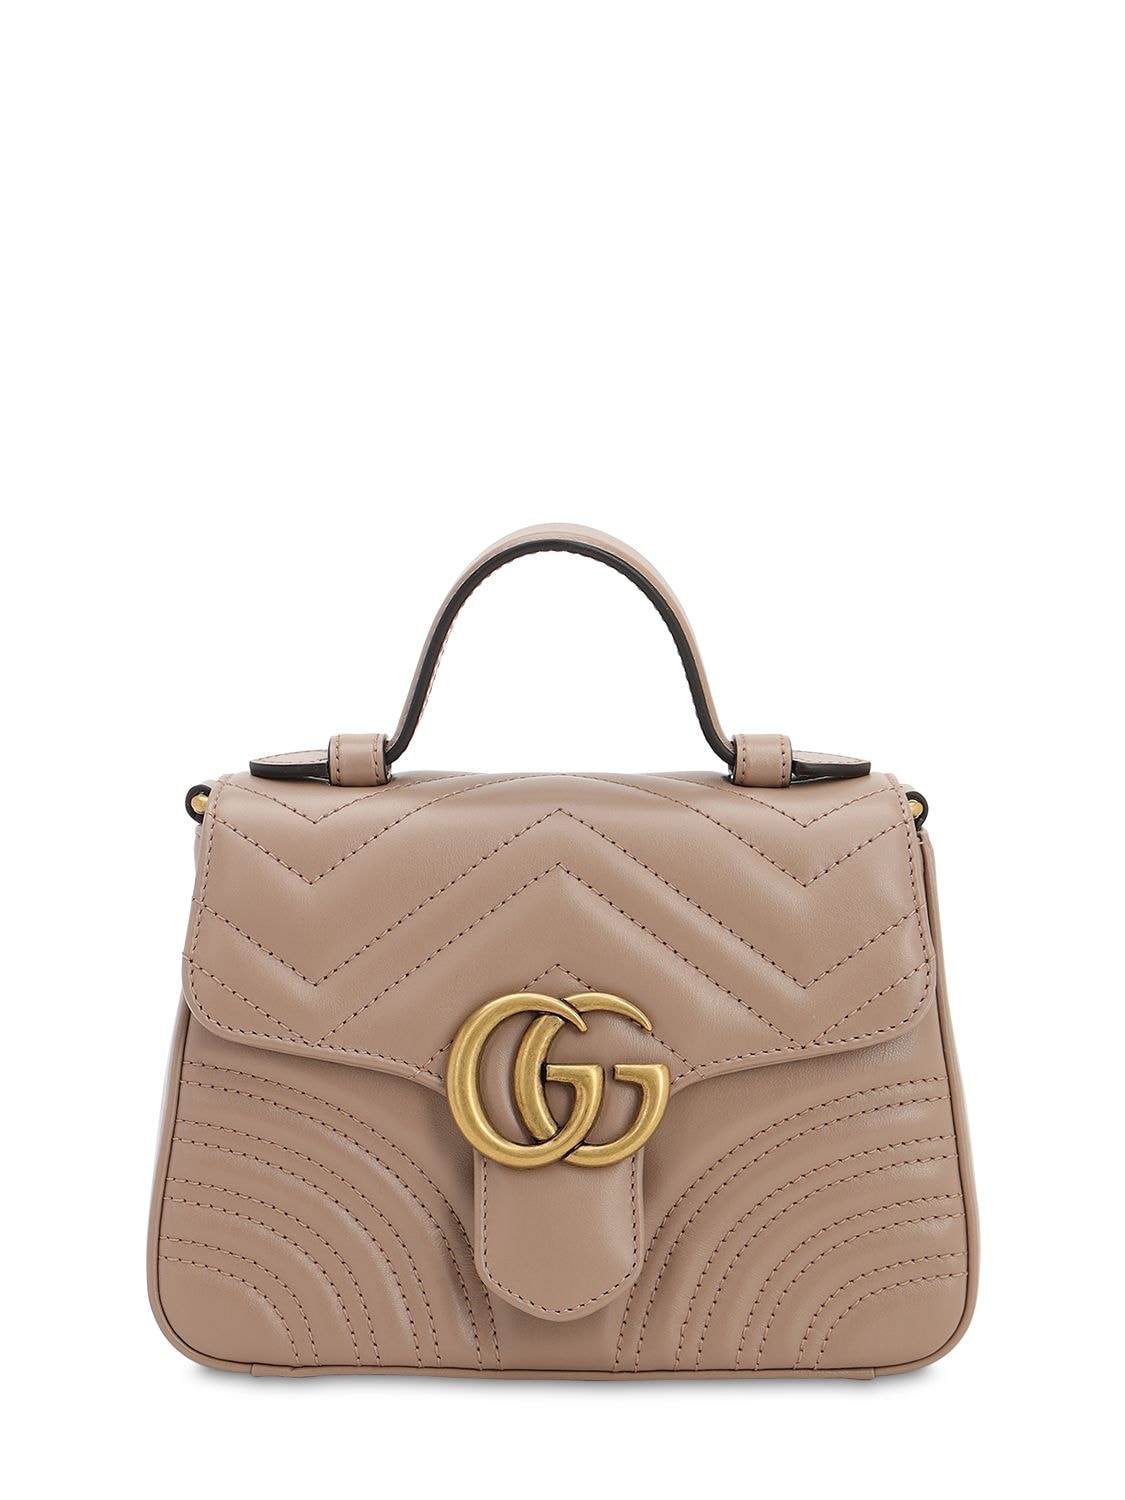 Gucci Mini Gg Marmont Leather Top Handle Bag In Poudre